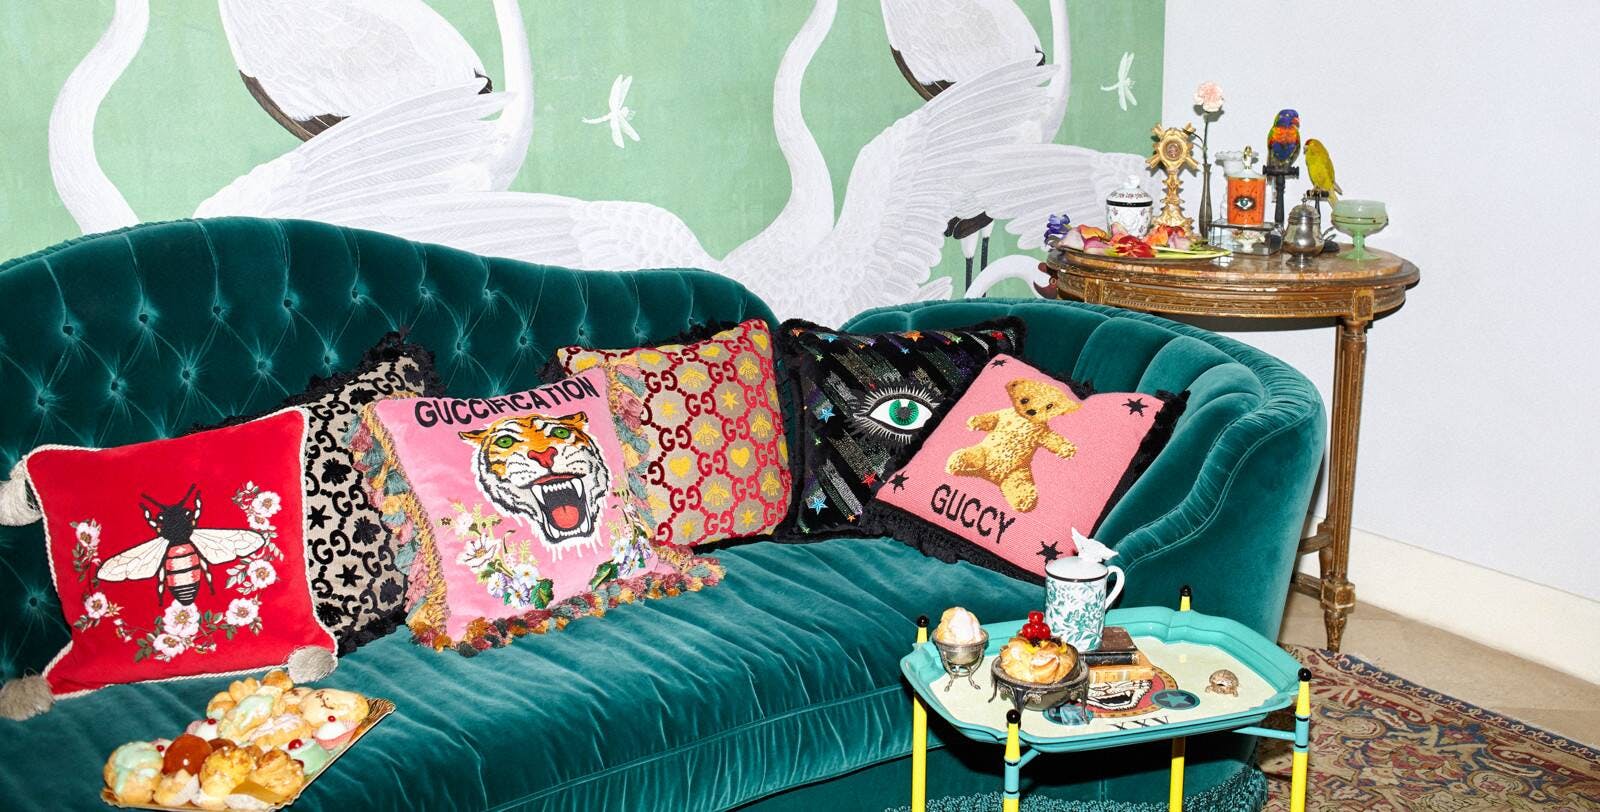 Gucci Influenced Fabric, Wallpaper and Home Decor